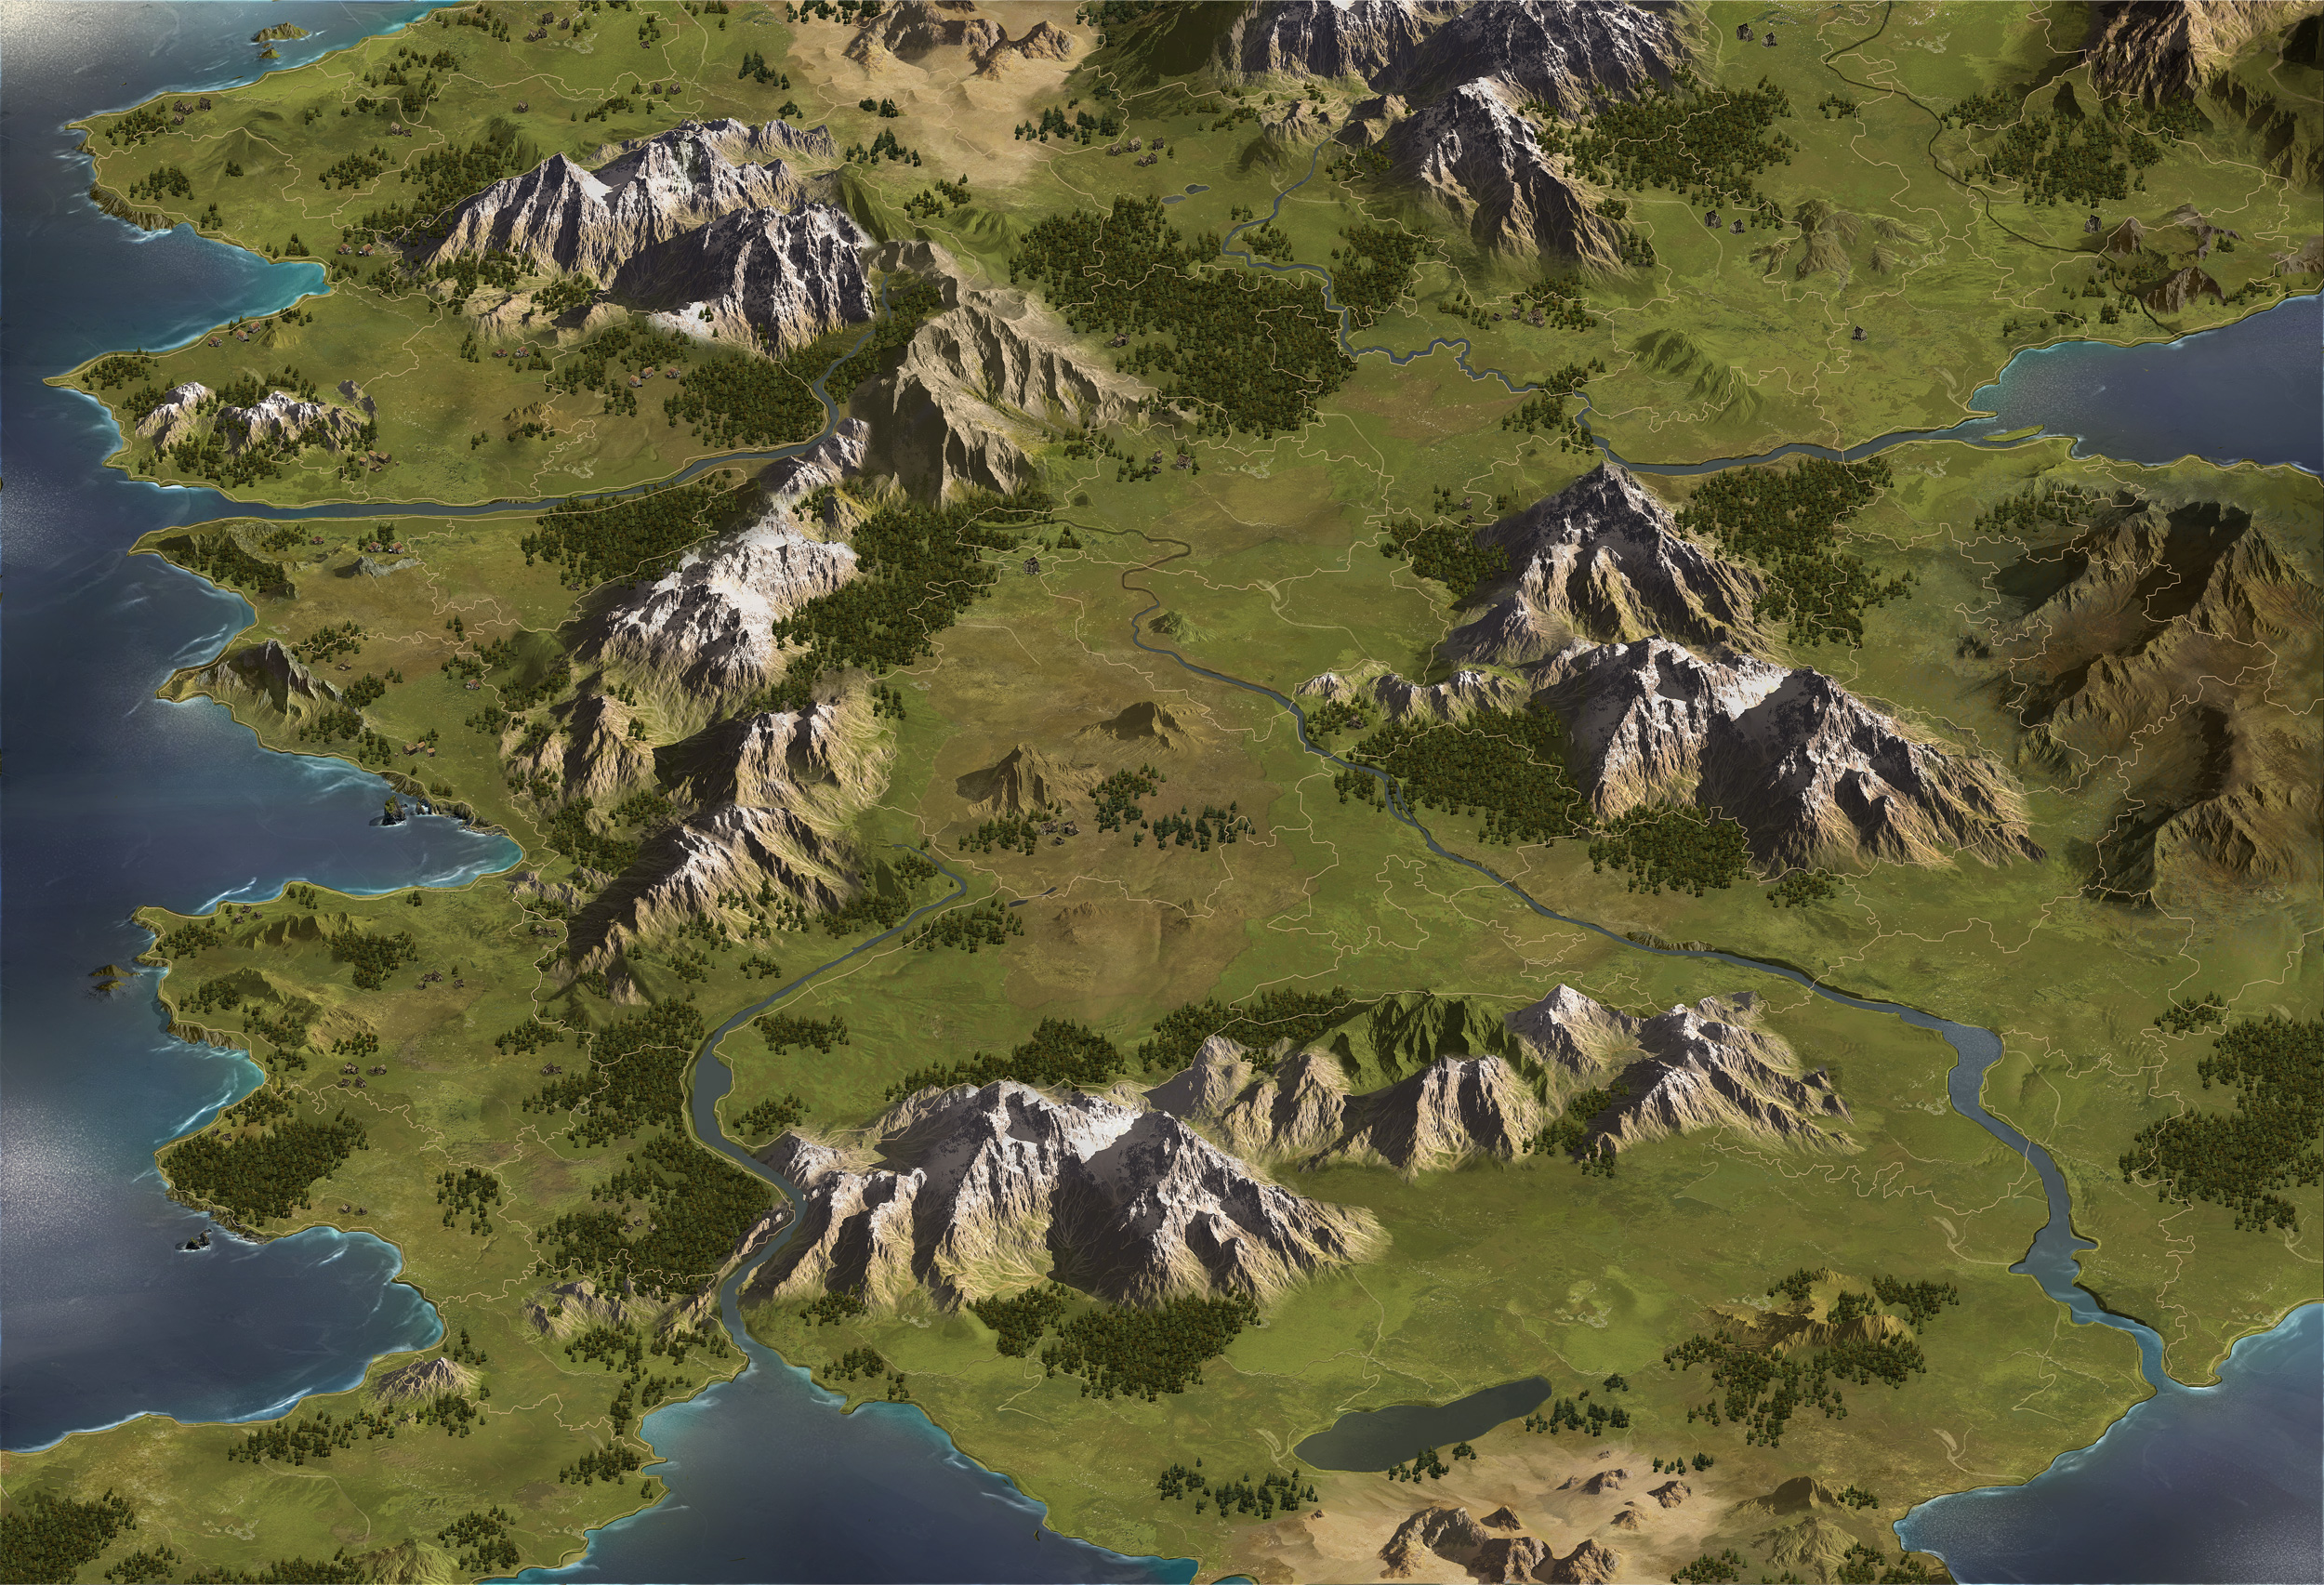 virtual future forge of empires map